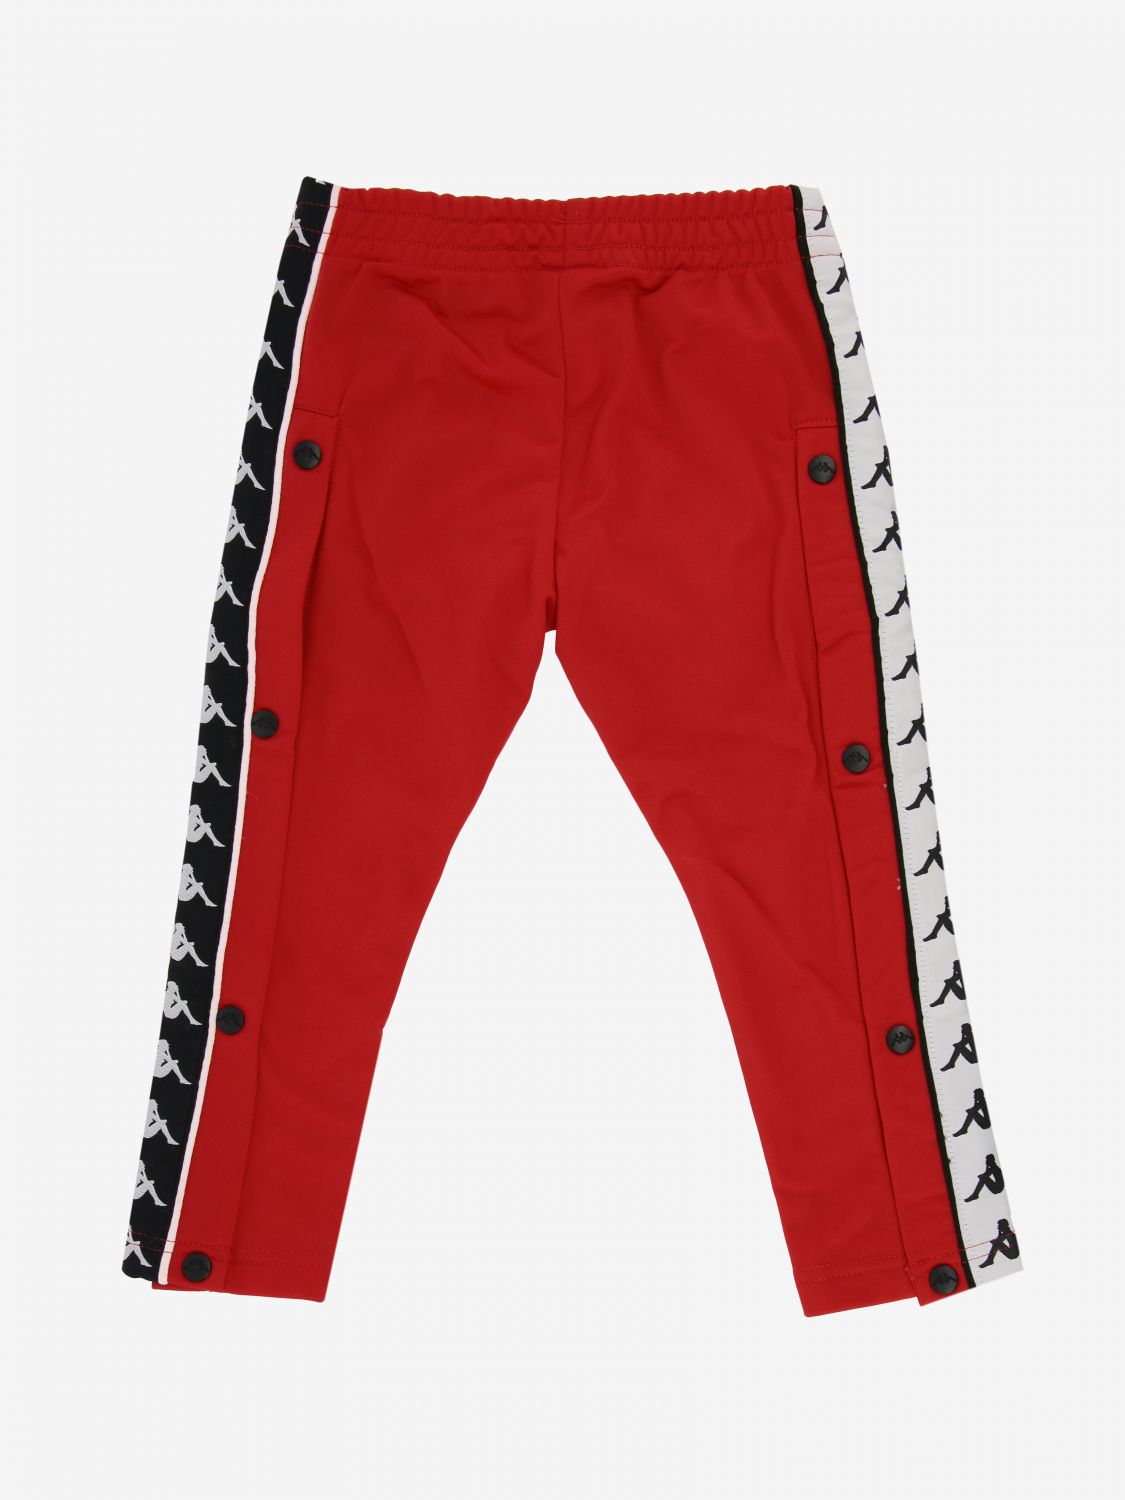 KAPPA Red Banda Tracksuit Bottoms  Men from Brother2Brother UK